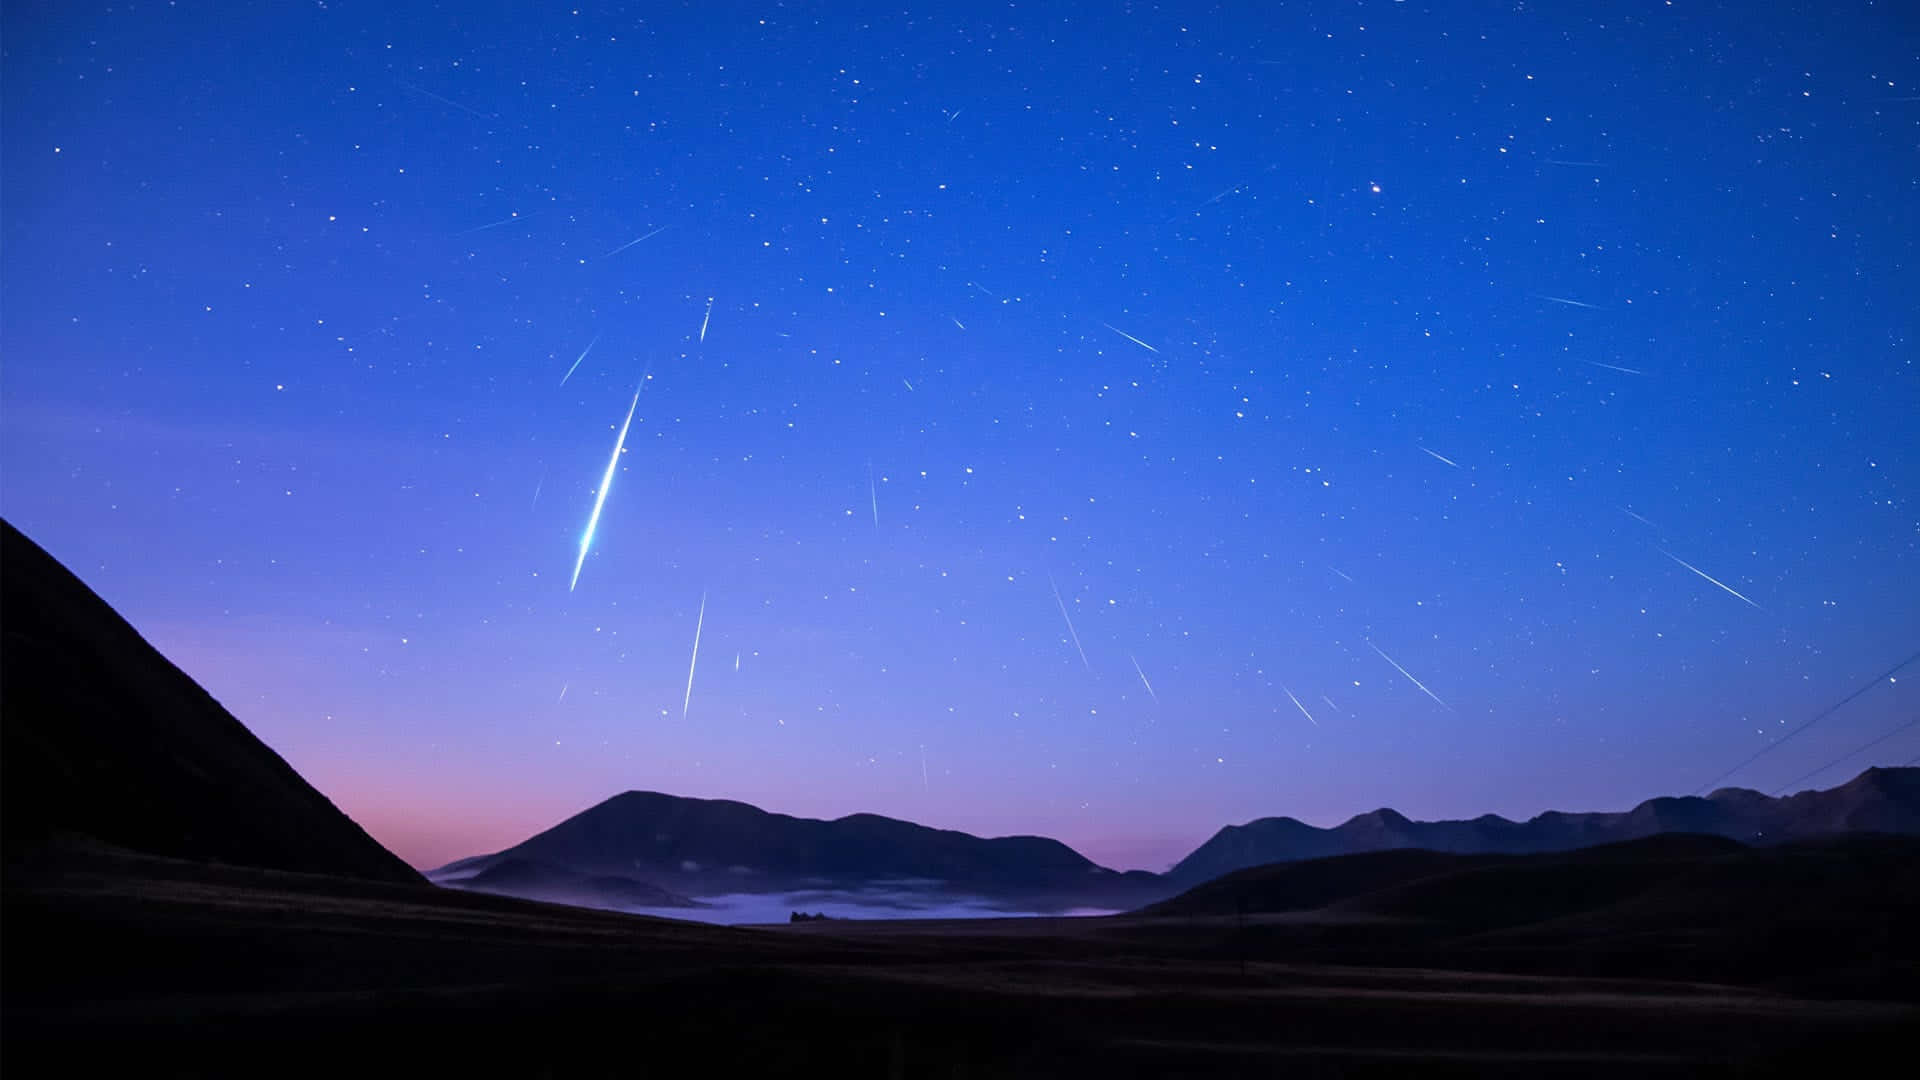 A beautiful nighttime view of a Meteor blazing across the night sky.